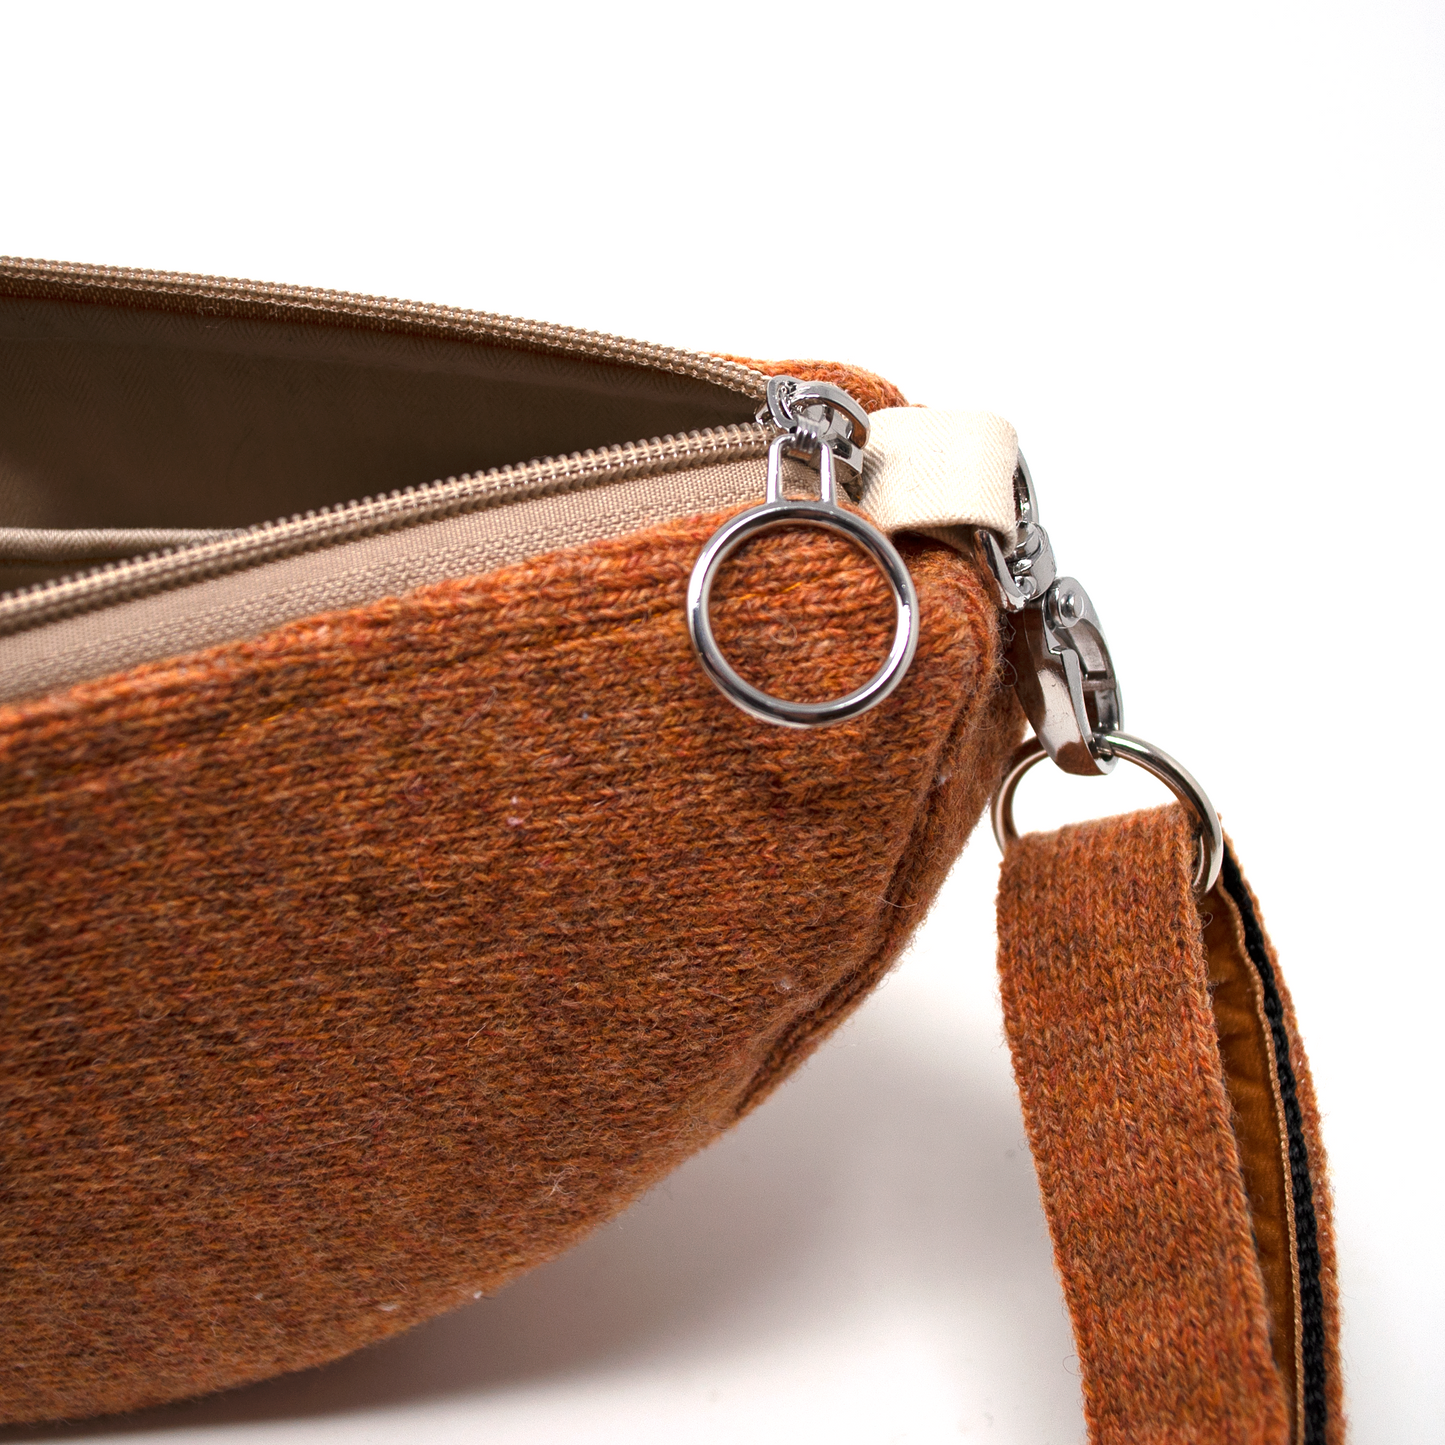 Copper - Autumn/Winter '23 Collection - Luxury Cross Body Bag